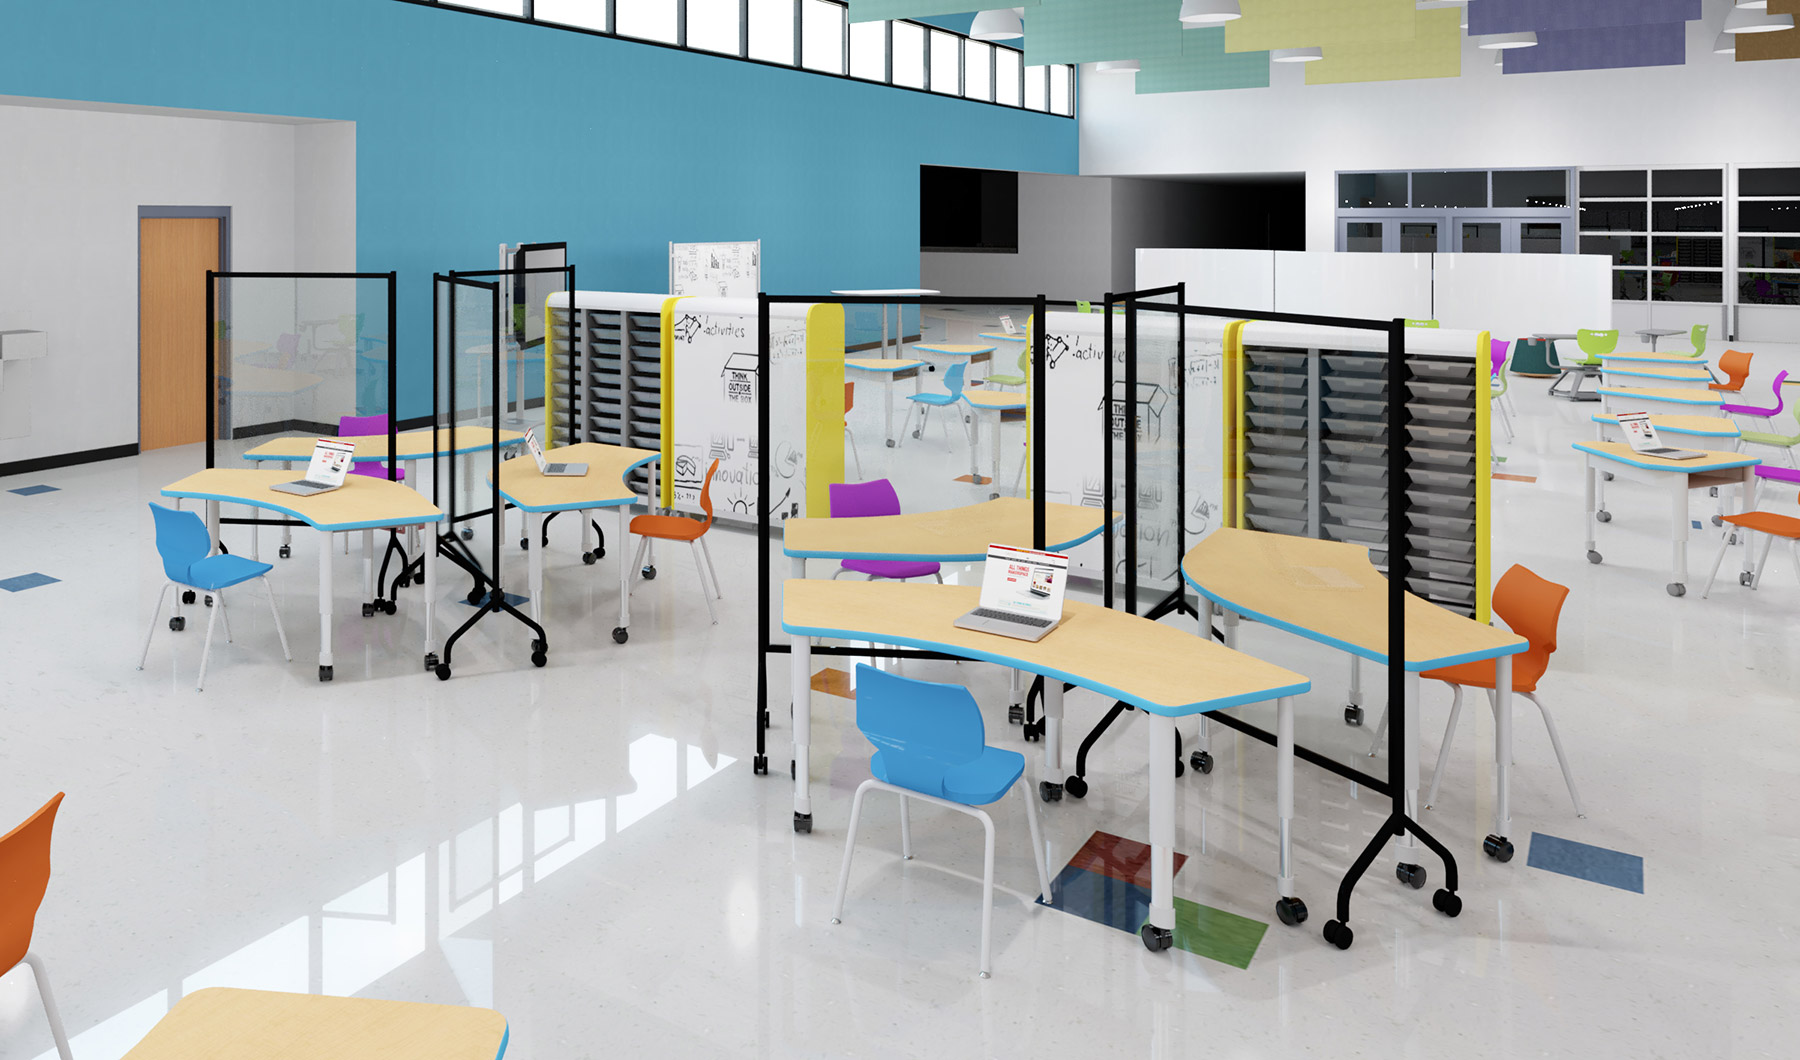 School Spaces Designed for Social Distancing - Cafeteria